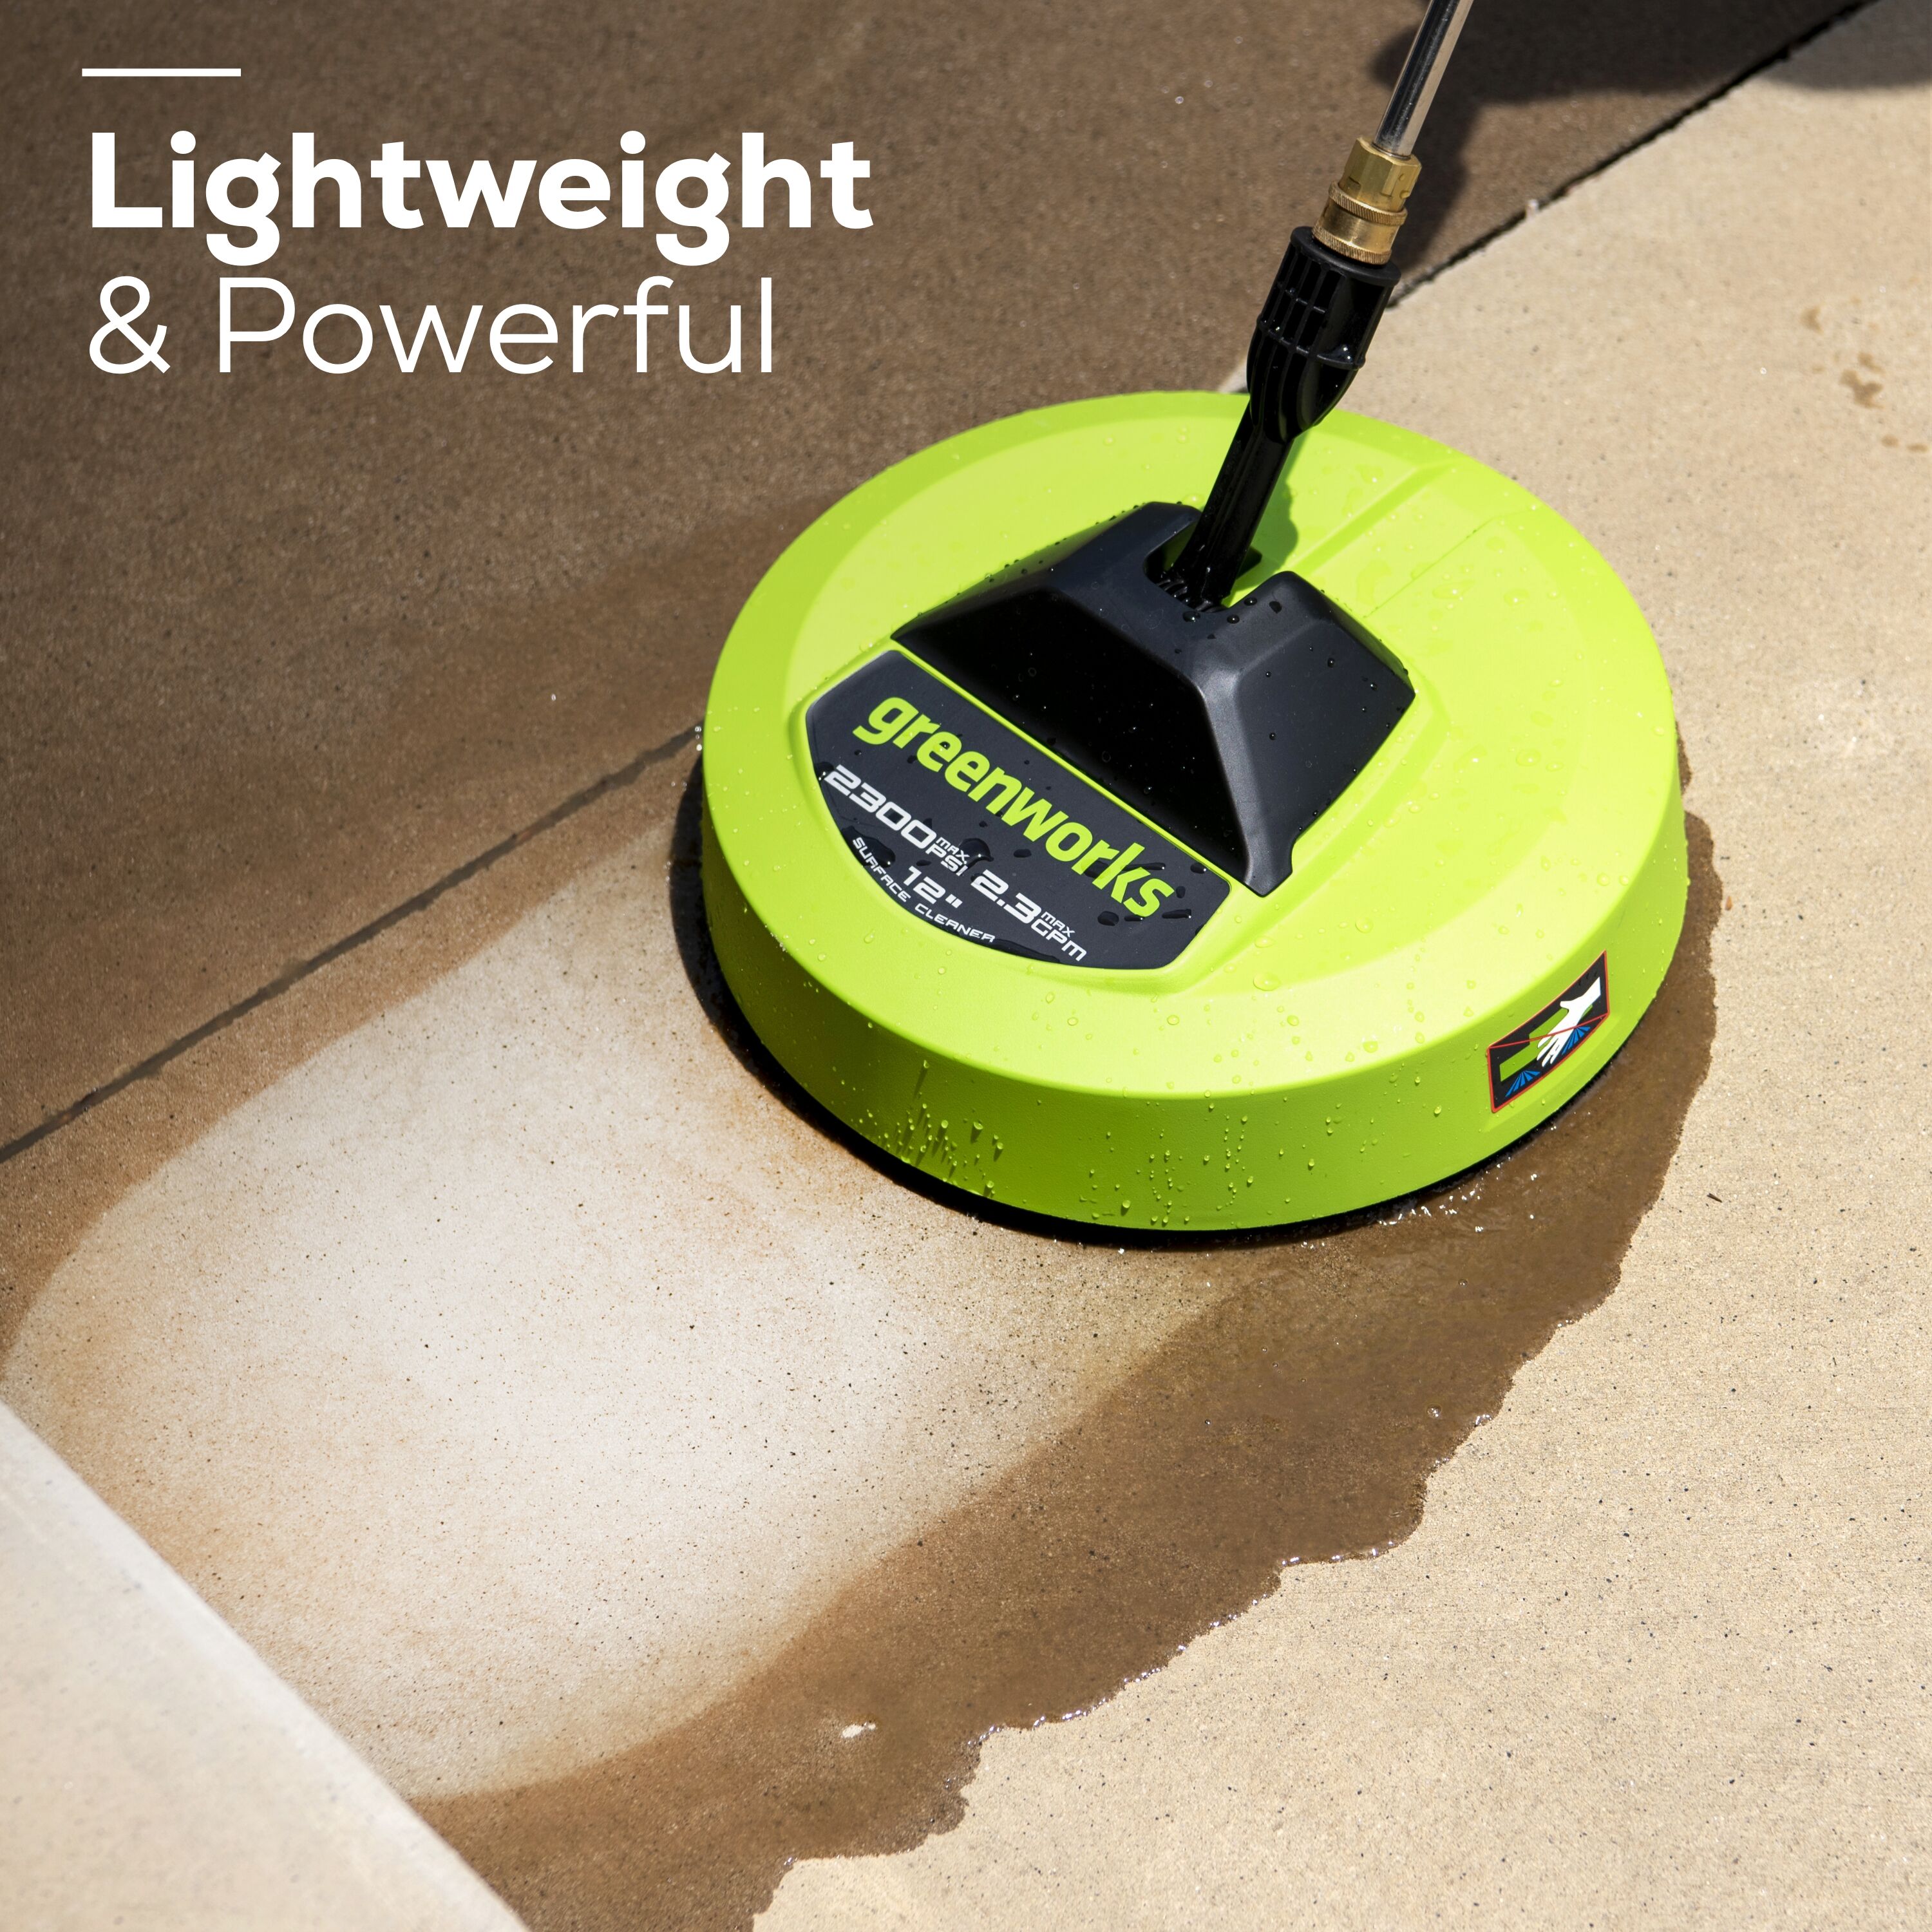 Greenworks 2000 Max PSI @ 1.2 GPM (13 Amp) Electric Pressure Washer GPW2003  + Greenworks Surface Cleaner Universal Pressure Washer Attachment 30012 +